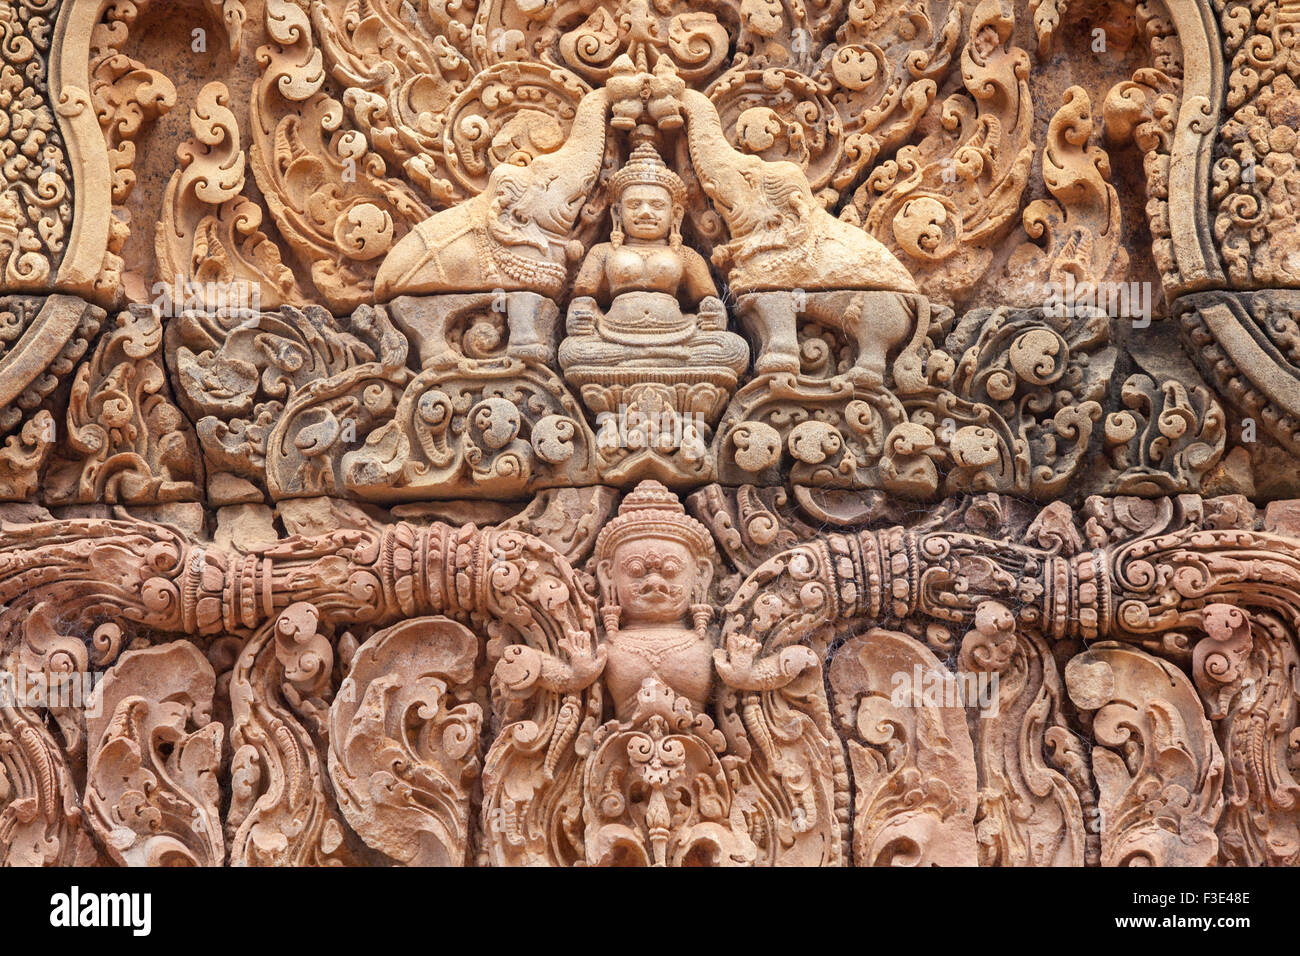 Banteay Srey temple, known as the jewel of Khmer art, Angkor Historical Park, Siem Reap, Cambodia Stock Photo